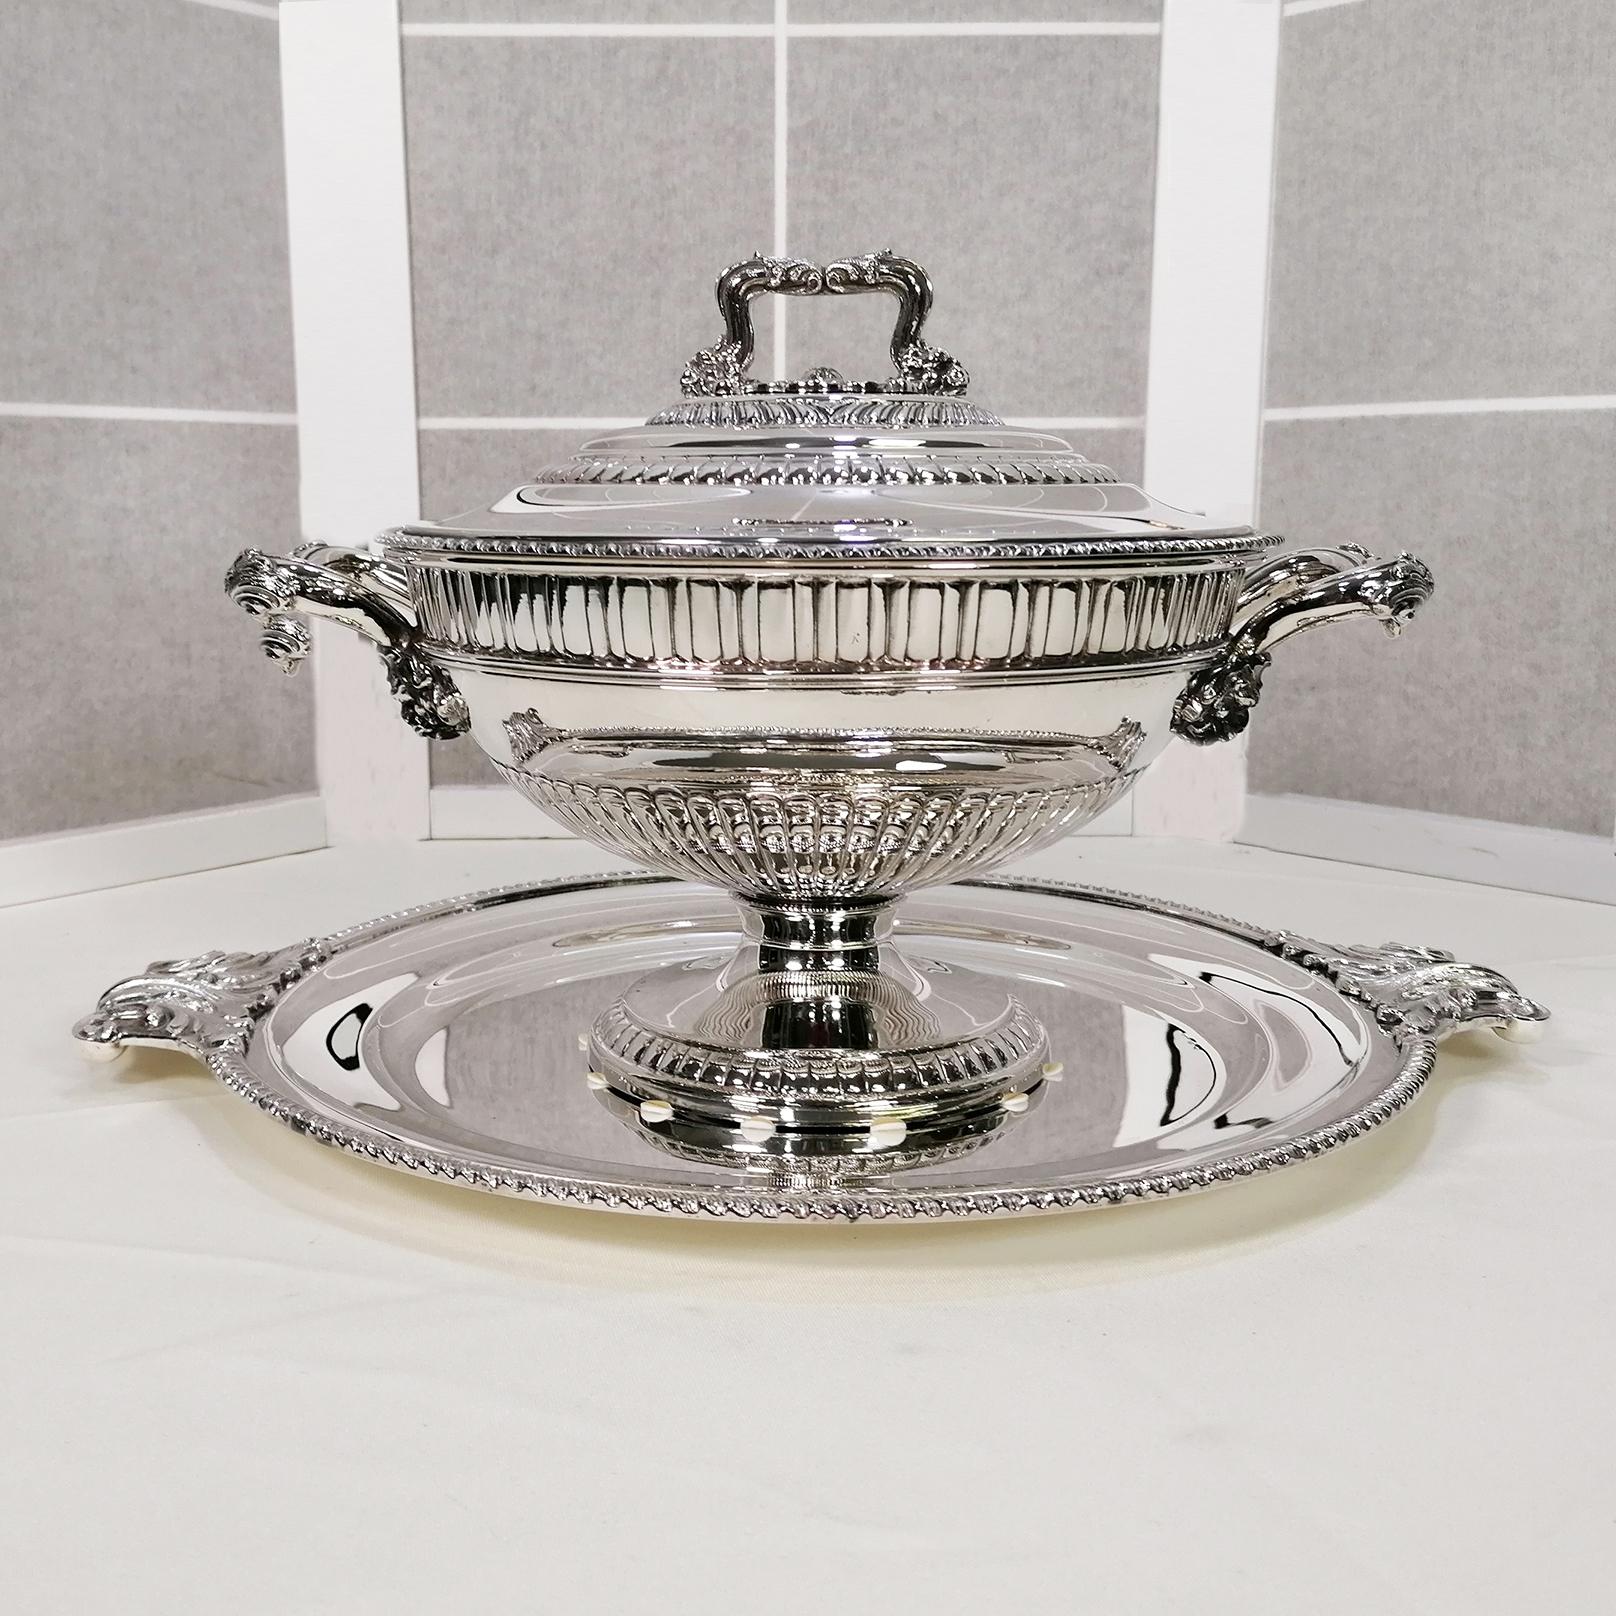 Large round sterling silver Queen Anne style tureen.
The plate is round with a welded cord border.
Two handles with an acanthus leaf design made using the fusion technique have been welded to two opposing parts. The handles were subsequently